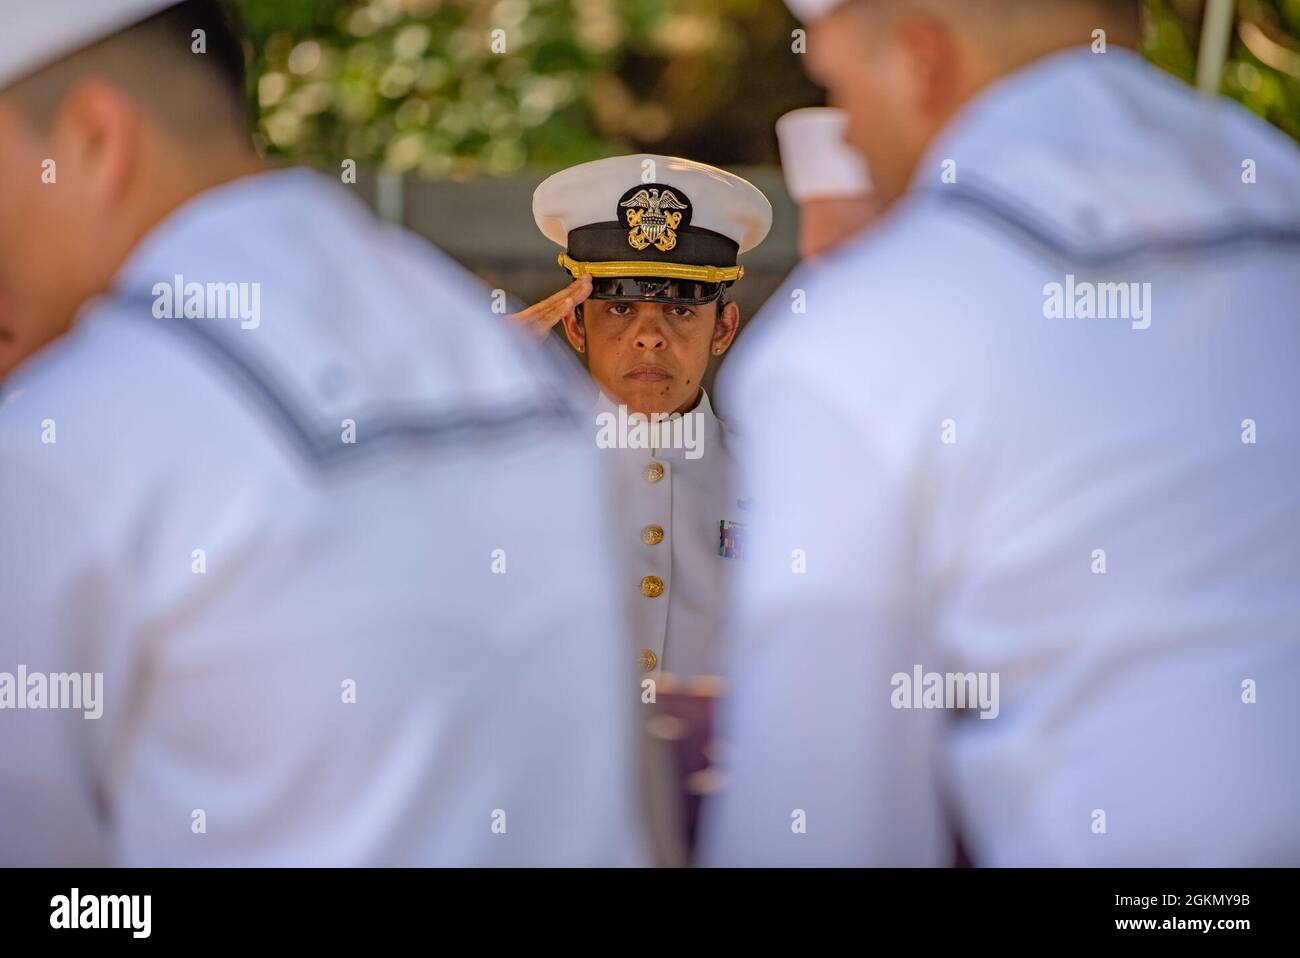 Sailors assigned to Navy Region Hawaii and the Defense POW/MIA Accounting Agency (DPAA) conduct a funeral for U.S. Navy Bandmaster James B. Booe, 42, of Veedersburg, Indiana, at the National Memorial Cemetery of the Pacific, Honolulu, Hawaii, June 1, 2021. Booe was assigned to the USS Oklahoma, which sustained fire from Japanese aircraft and multiple torpedo hits causing the ship to capsize and resulted in the deaths of more than 400 crew members on Dec. 7, 1941, at Ford Island, Pearl Harbor. Booe was recently identified through DNA analysis by the DPAA forensic laboratory and laid to rest wit Stock Photo